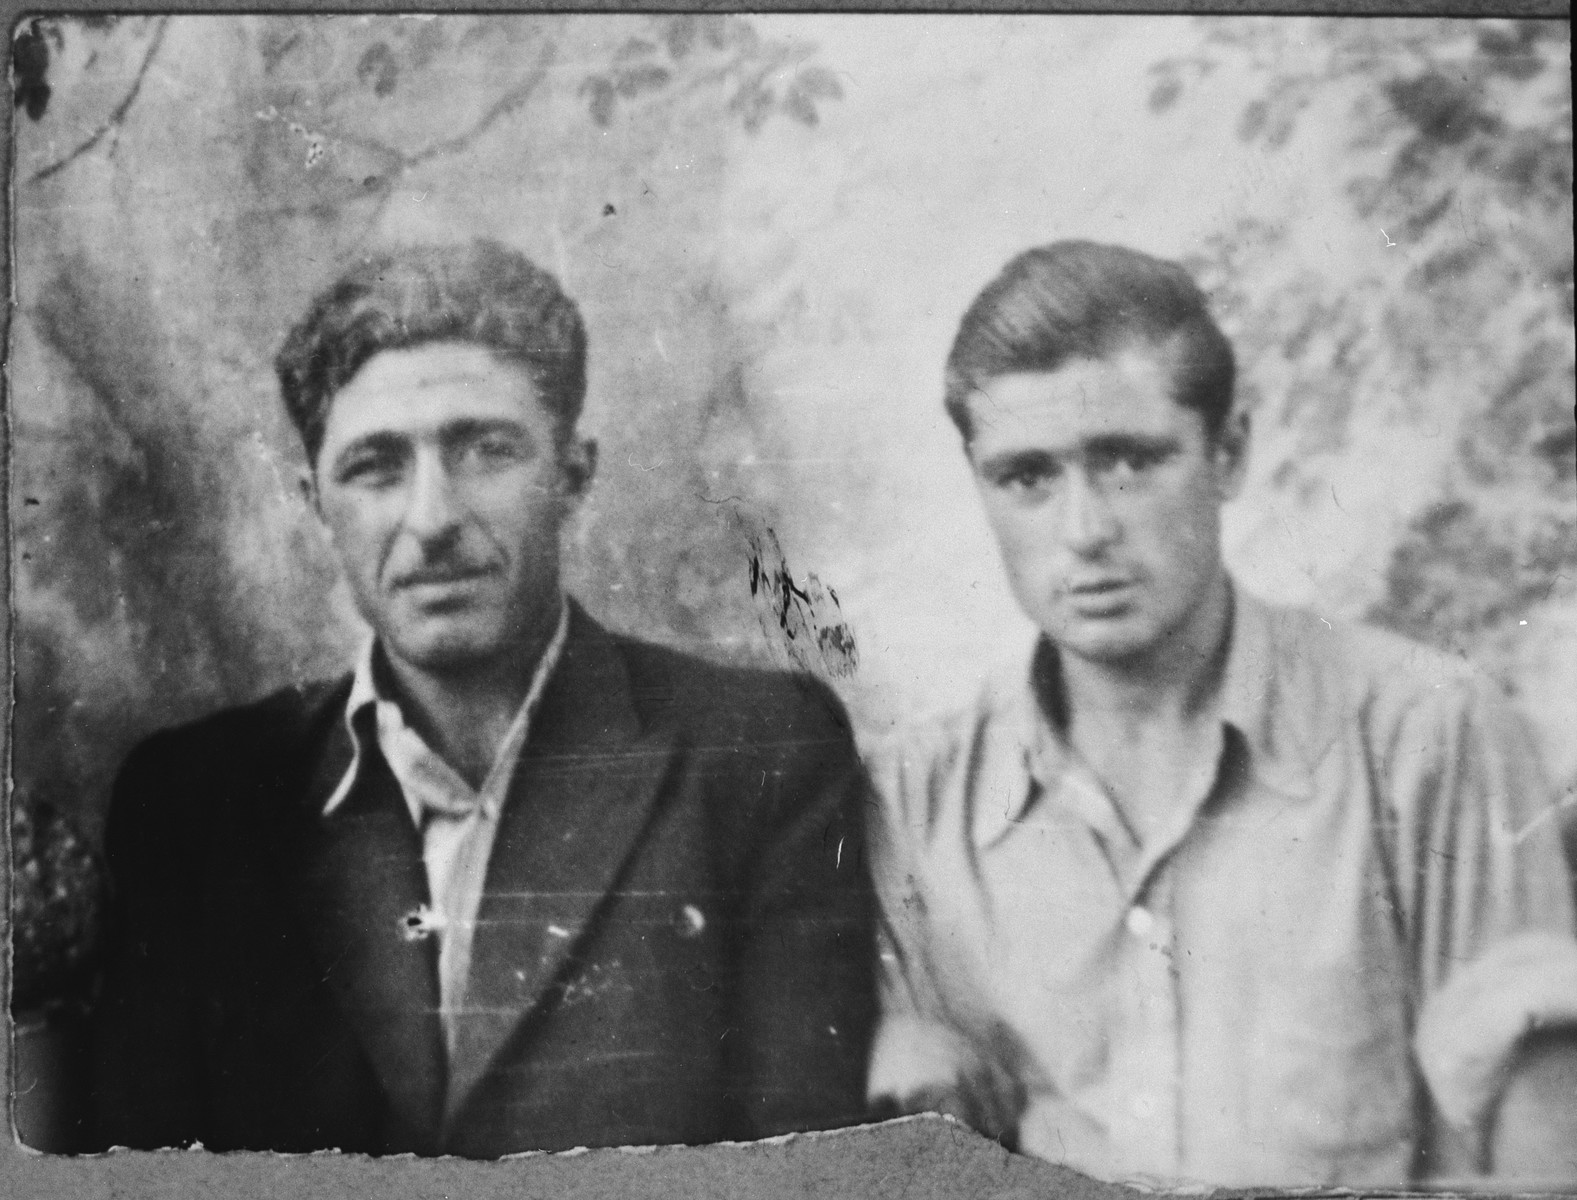 Portrait of Gabriel and Eli Mishulam, sons of Benzion Mishulam.  Gabriel was a laborer and Eli, a student.  They lived at Orizarska 7 in Bitola.